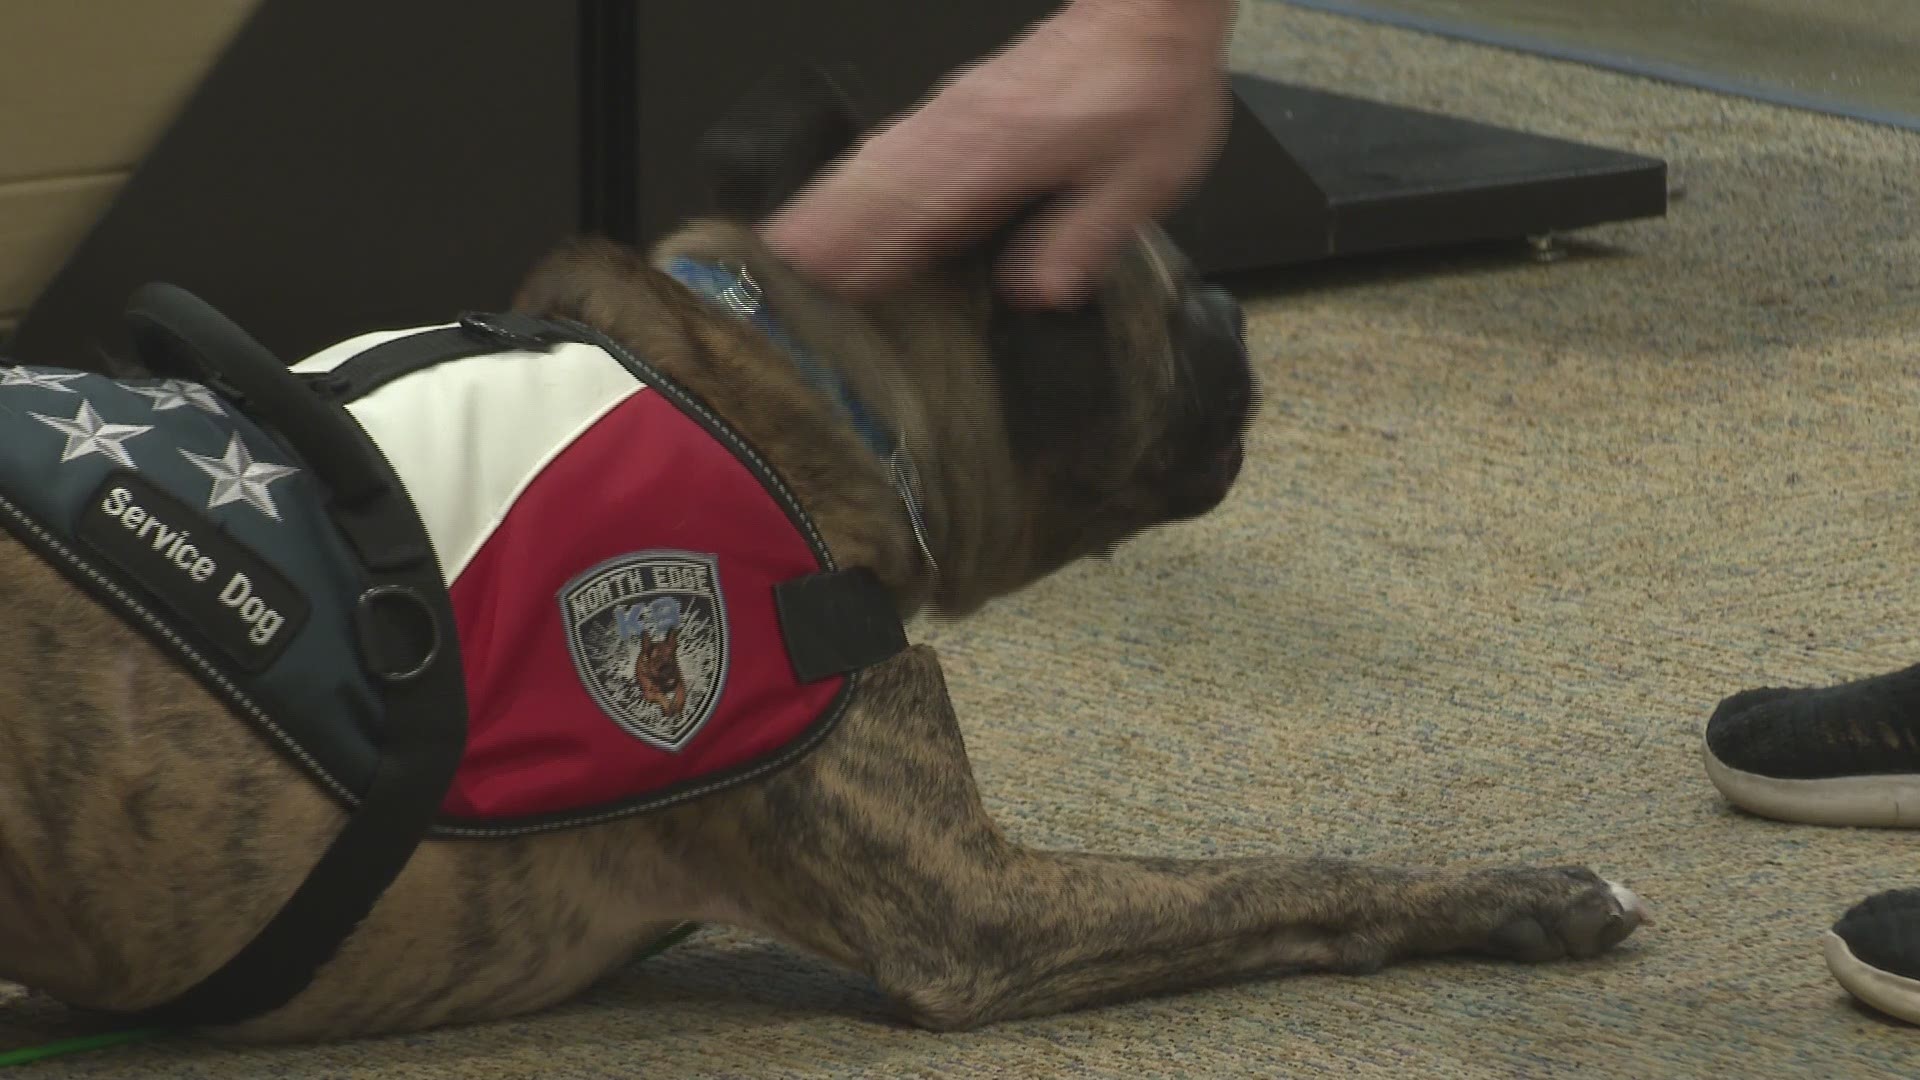 K9s on The Front Line has placed around 150 dogs with veterans living with Post Traumatic Stress Disorder.